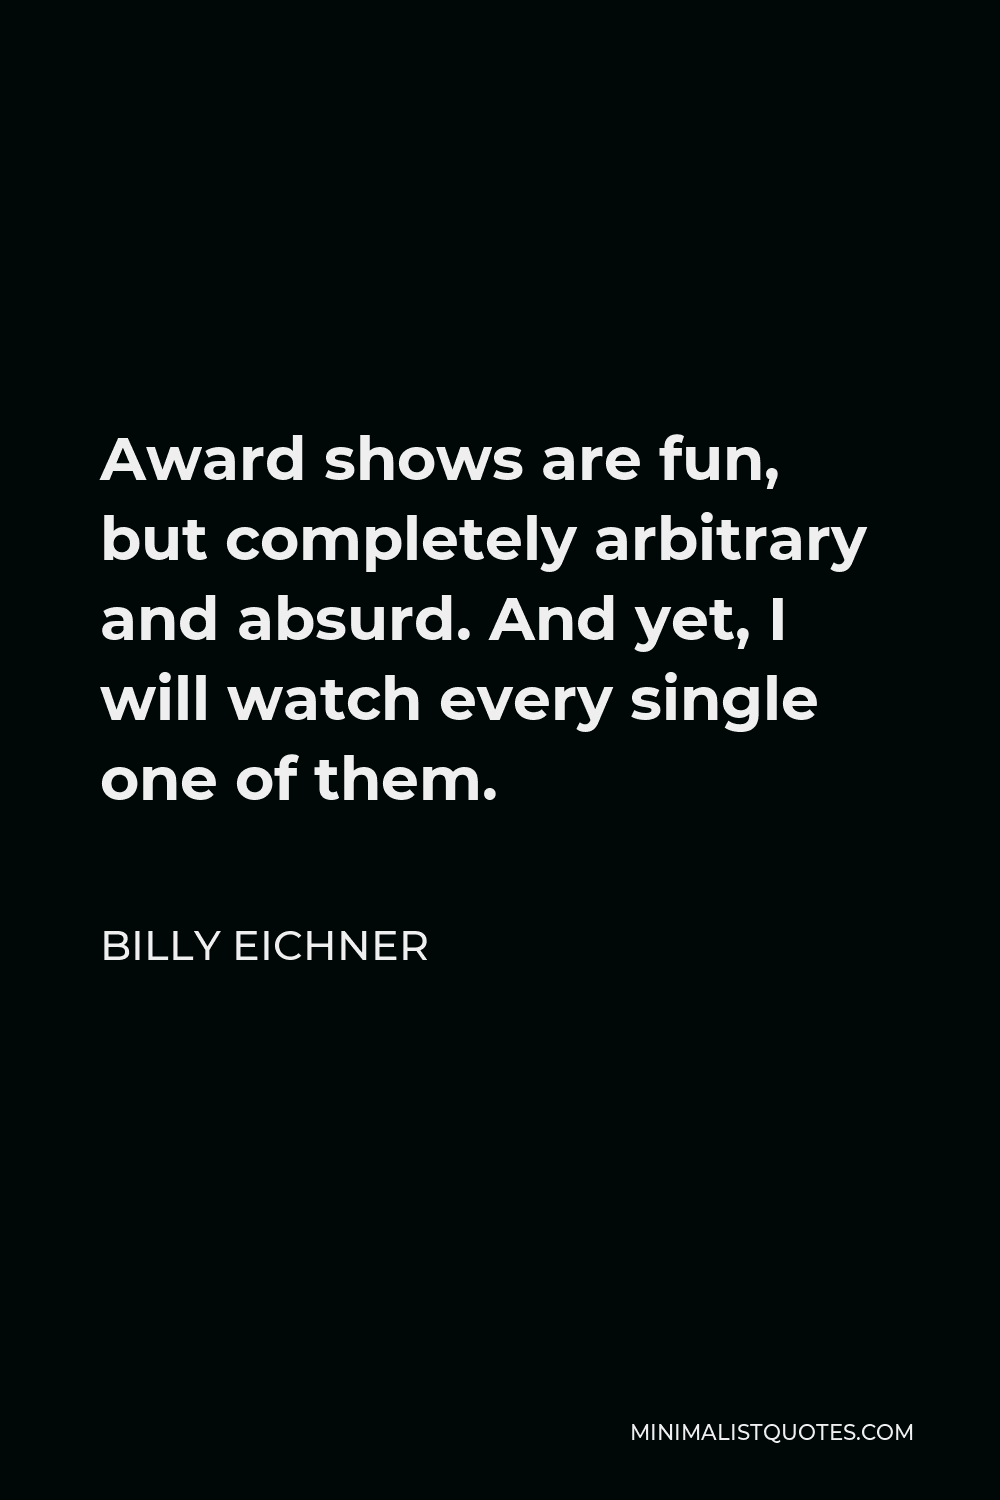 Billy Eichner Quote - Award shows are fun, but completely arbitrary and absurd. And yet, I will watch every single one of them.